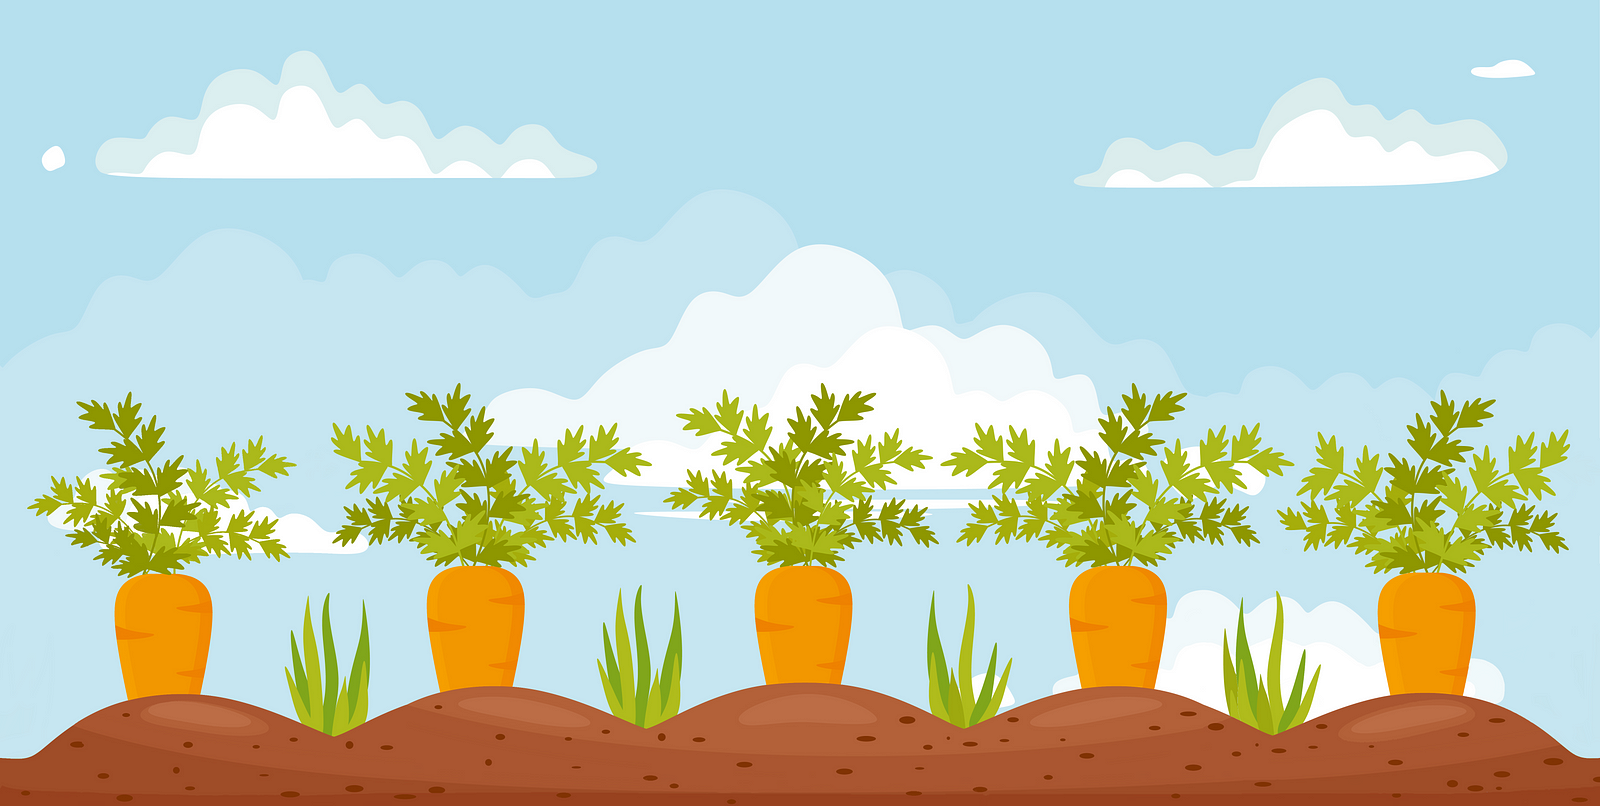 Illustration by Unique Vector. Edited to include five carrots by Sari Kivijarvi.